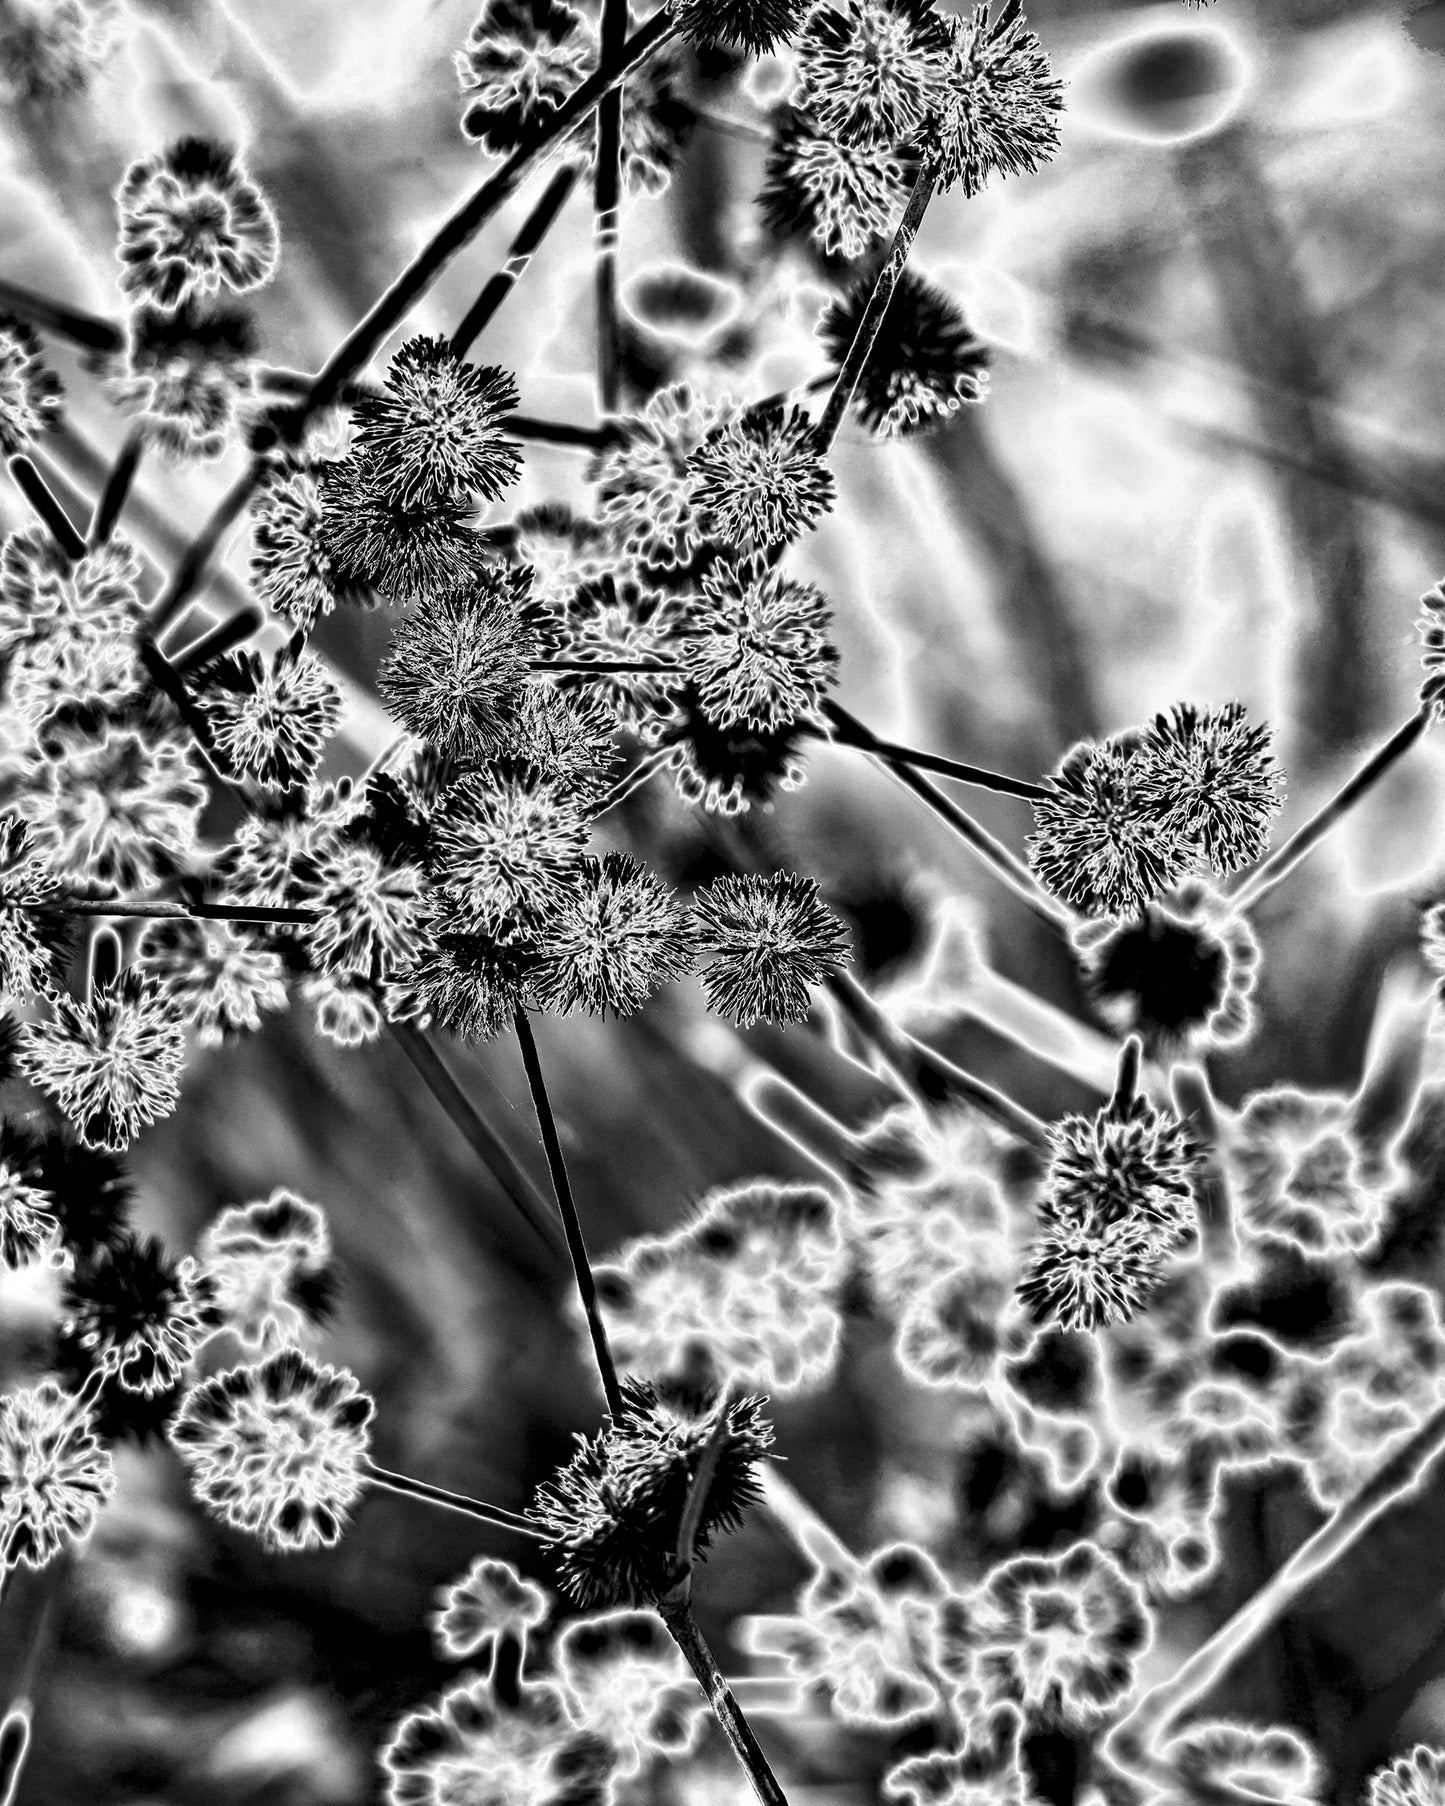 black and white close up of plant with solarized effect